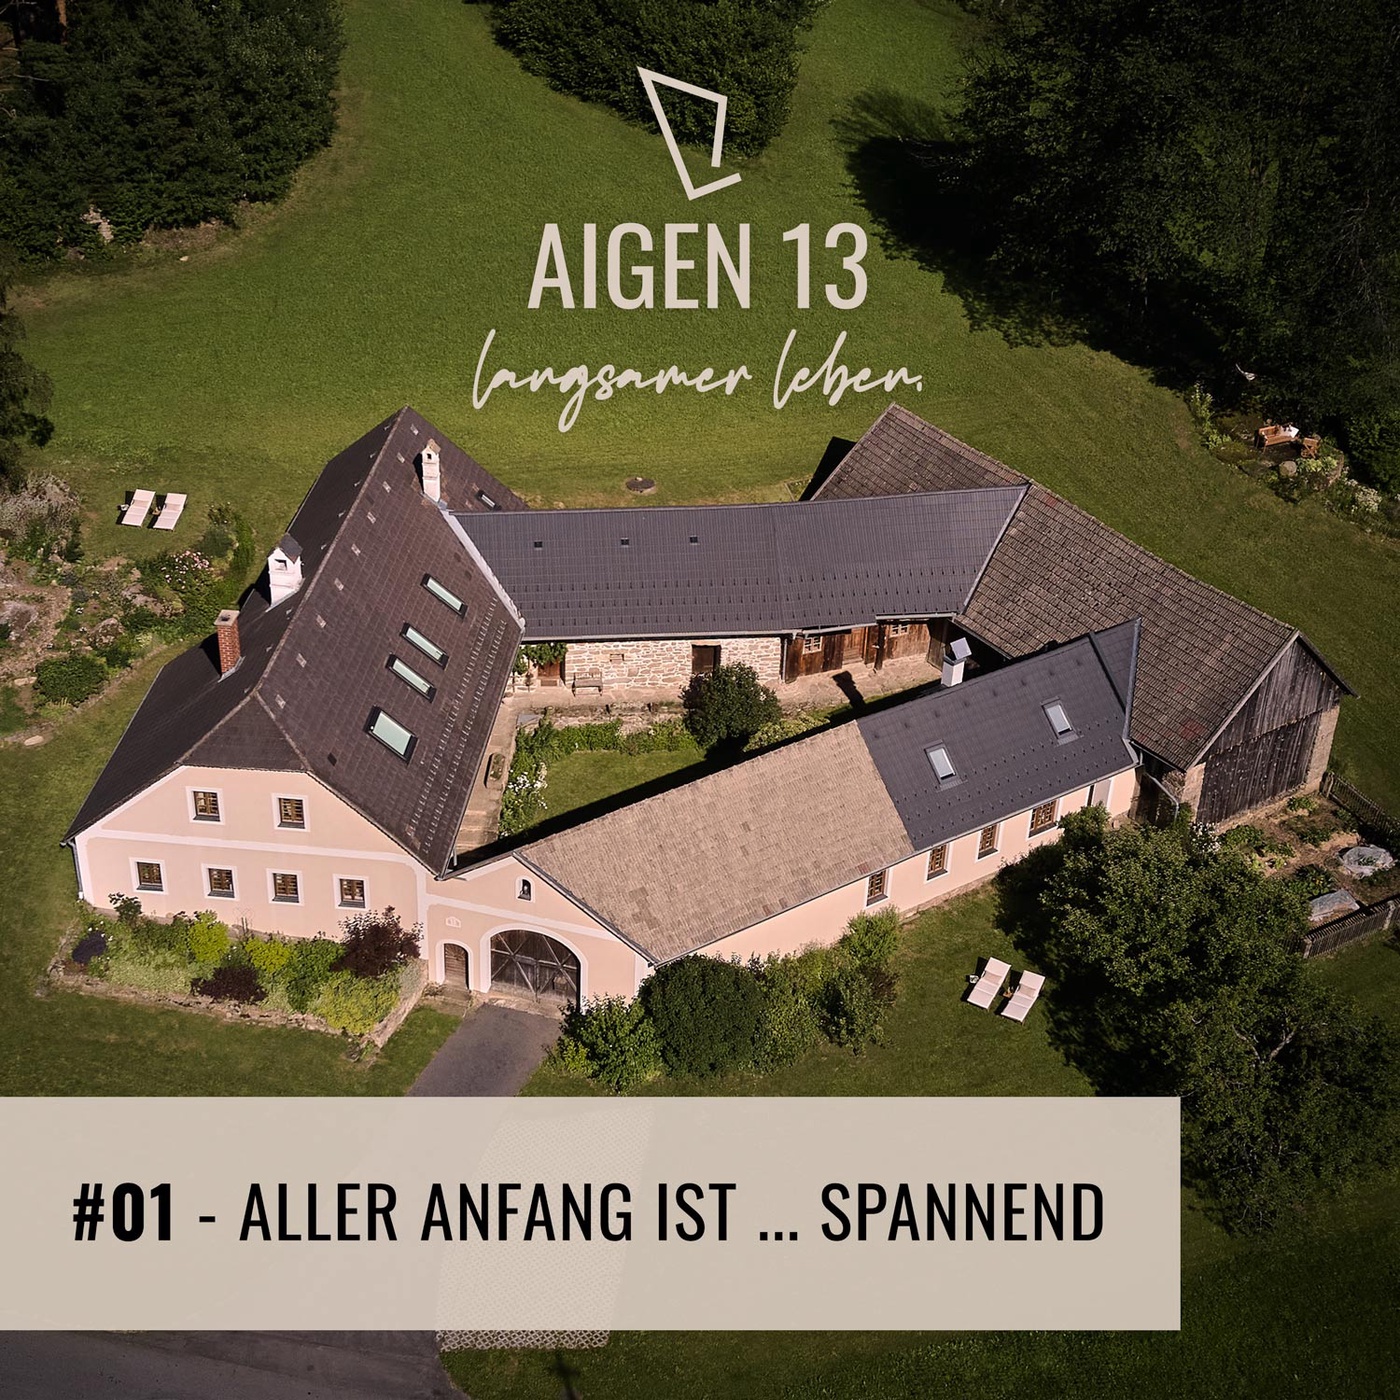 #01 - Aller Anfang ist ... spannend